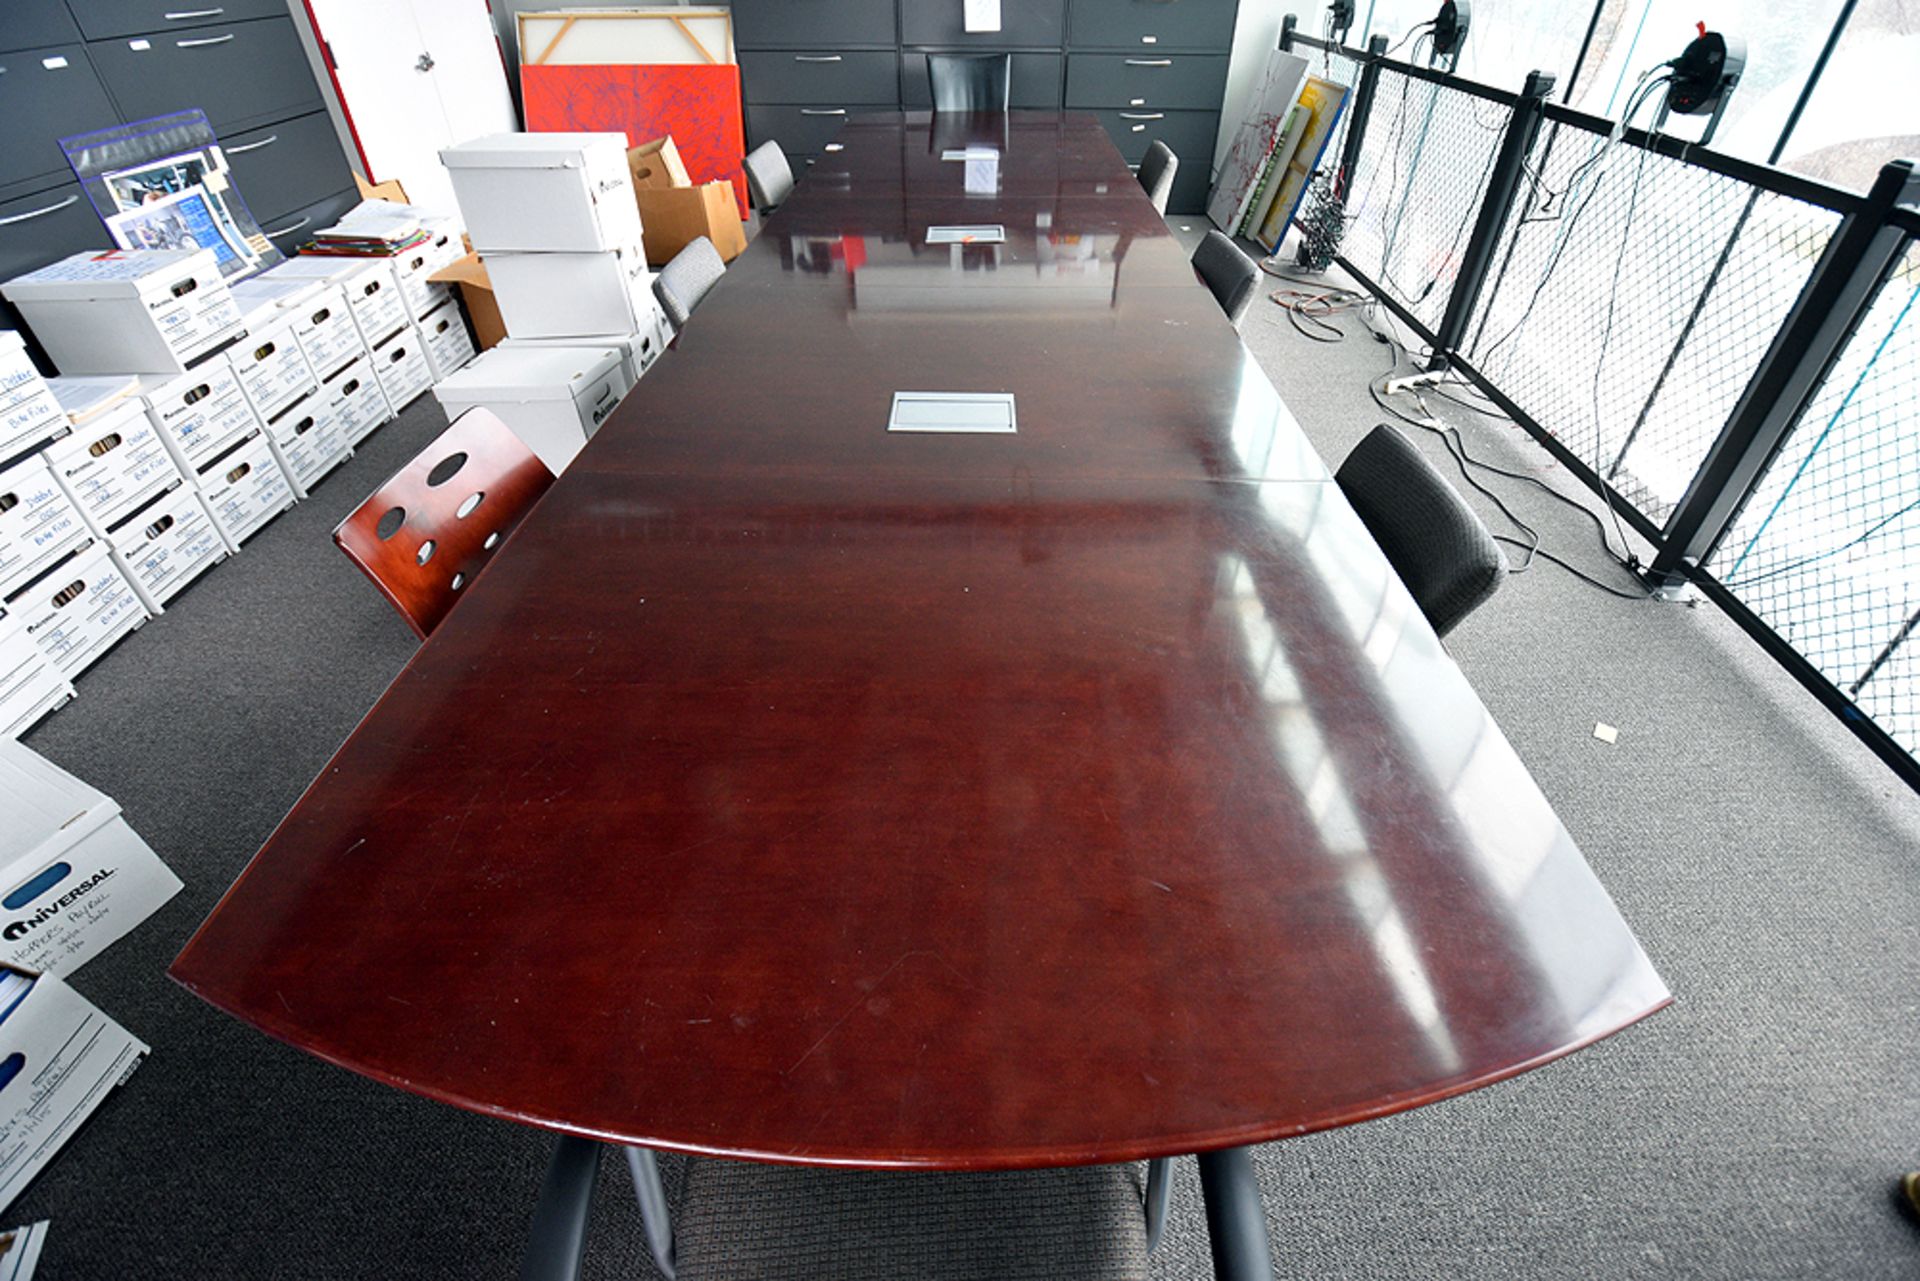 Executive Wood Conference Table (18'L. x 54"W. x 29"H) w/ (8) Ass't Chairs - Image 3 of 5